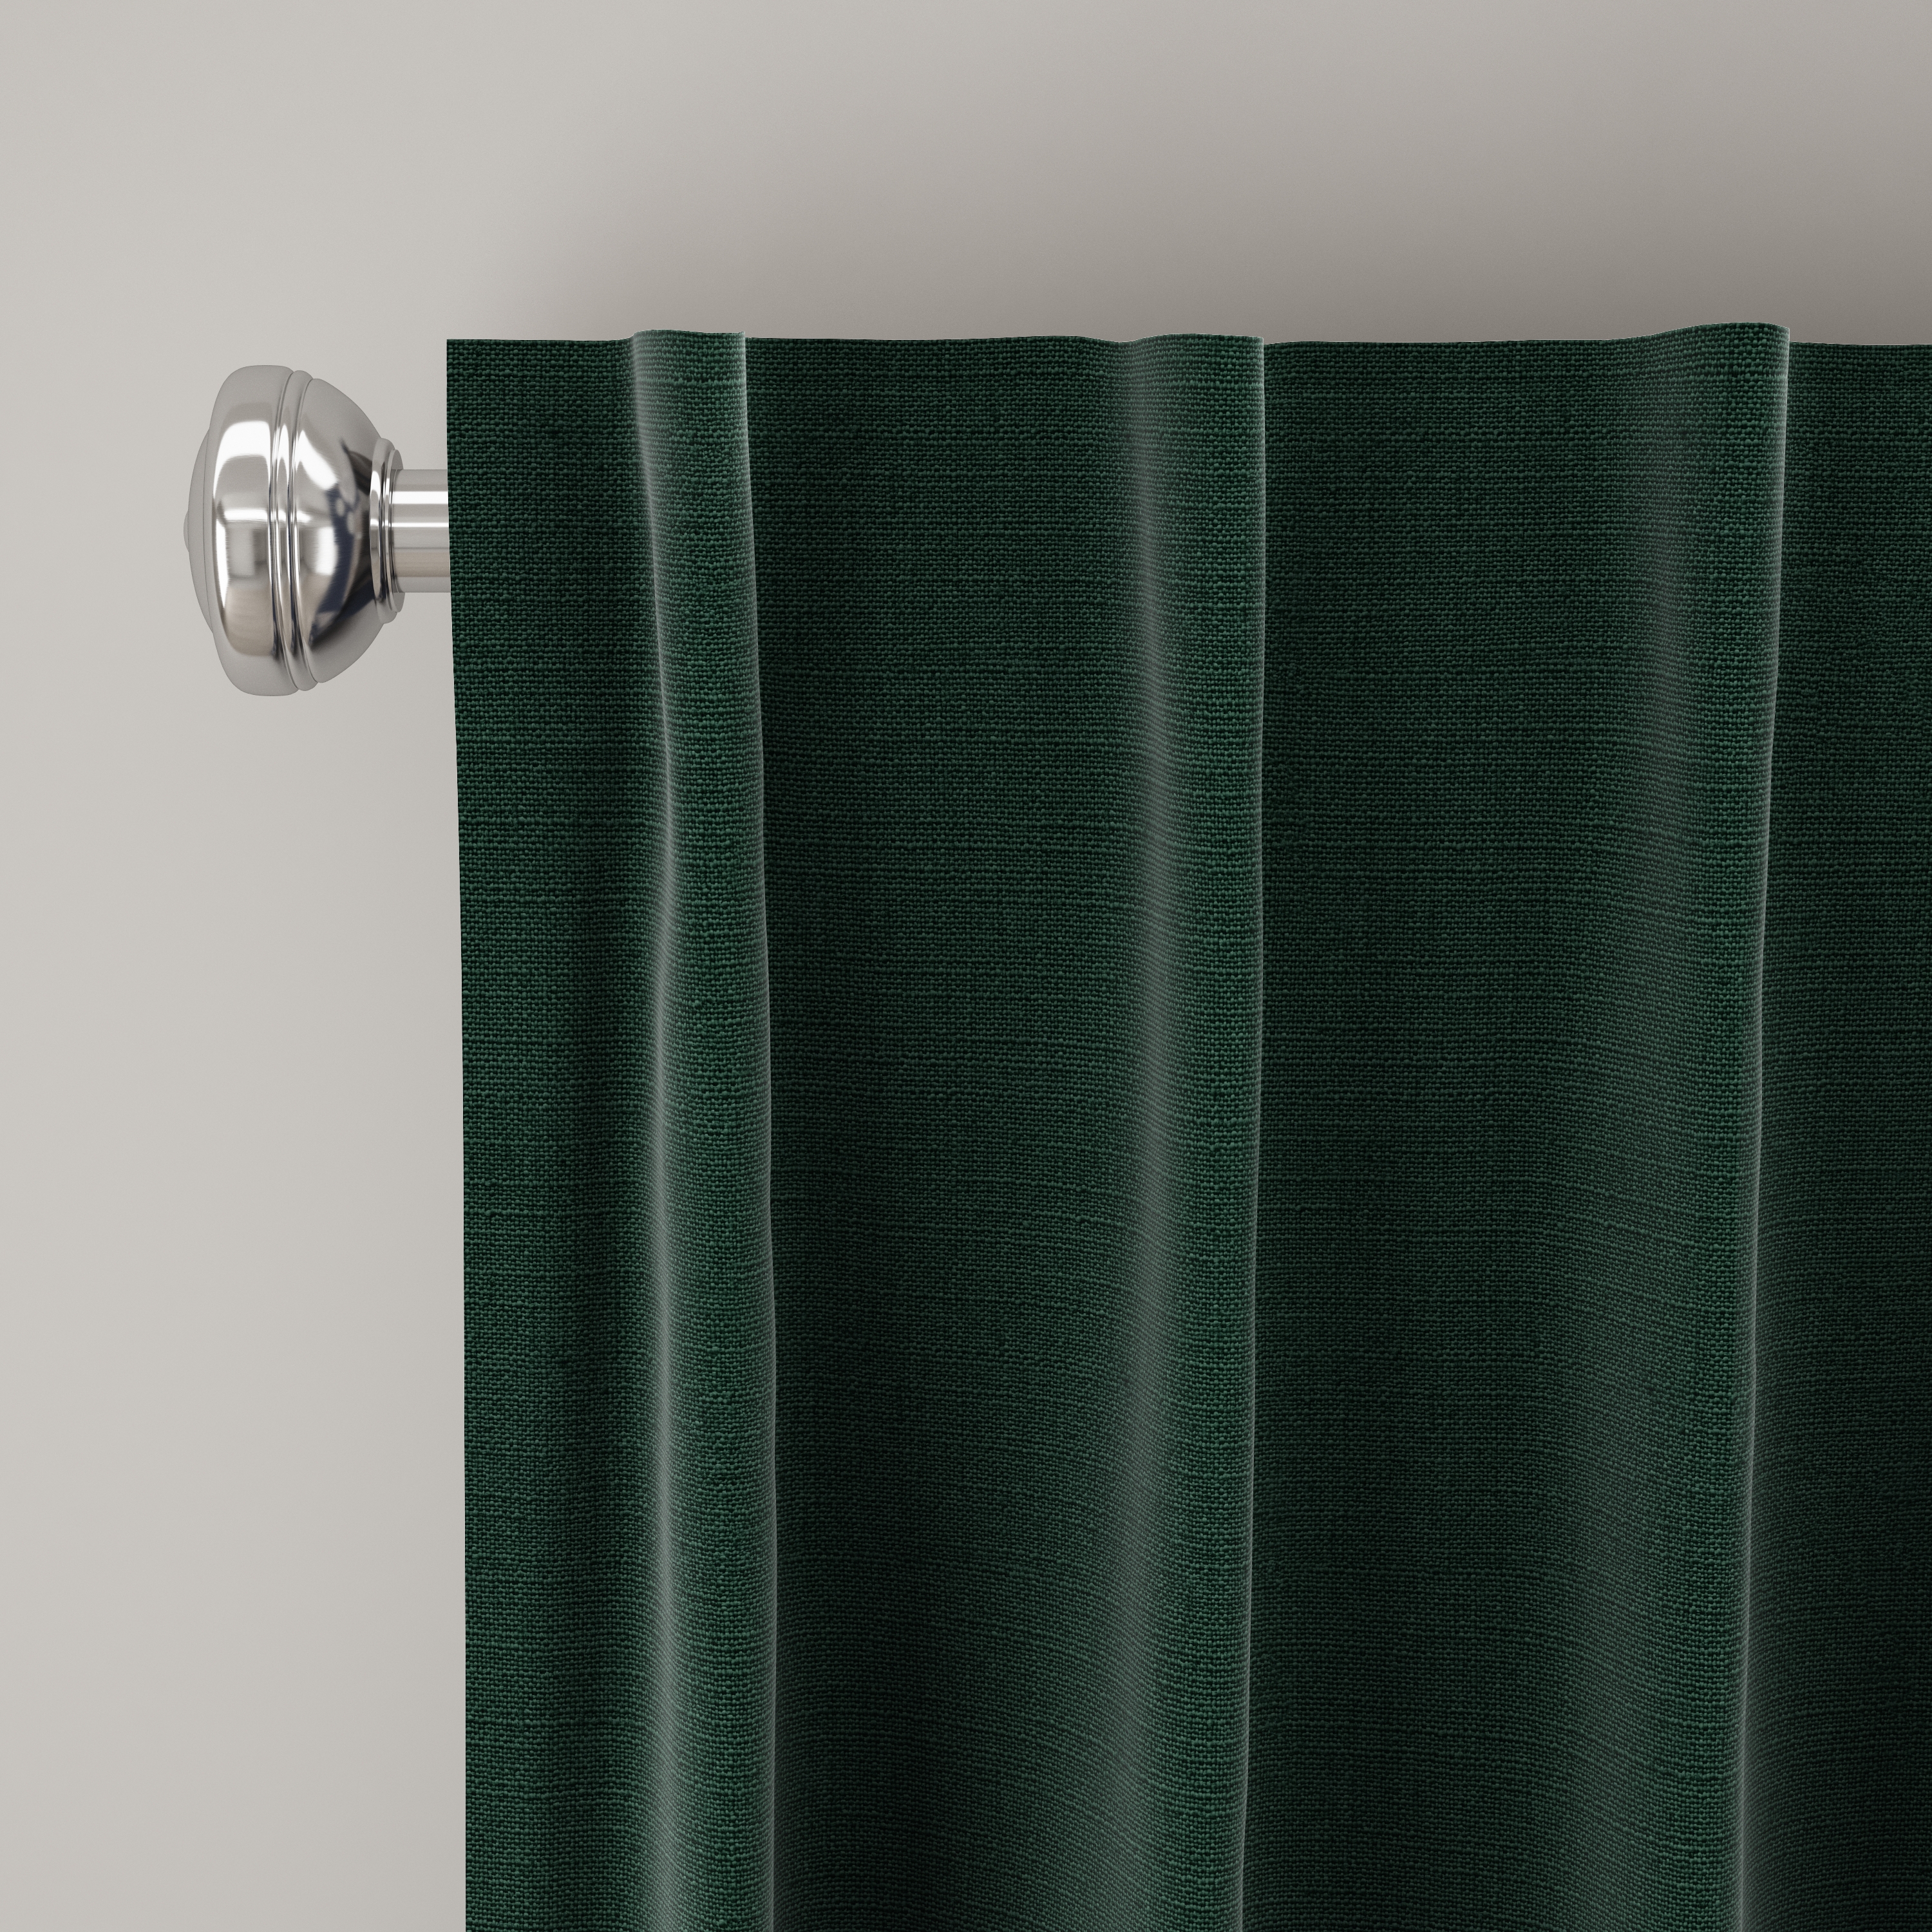 Conifer Green Curtain Panel, 96" x 50" Unlined - Image 1